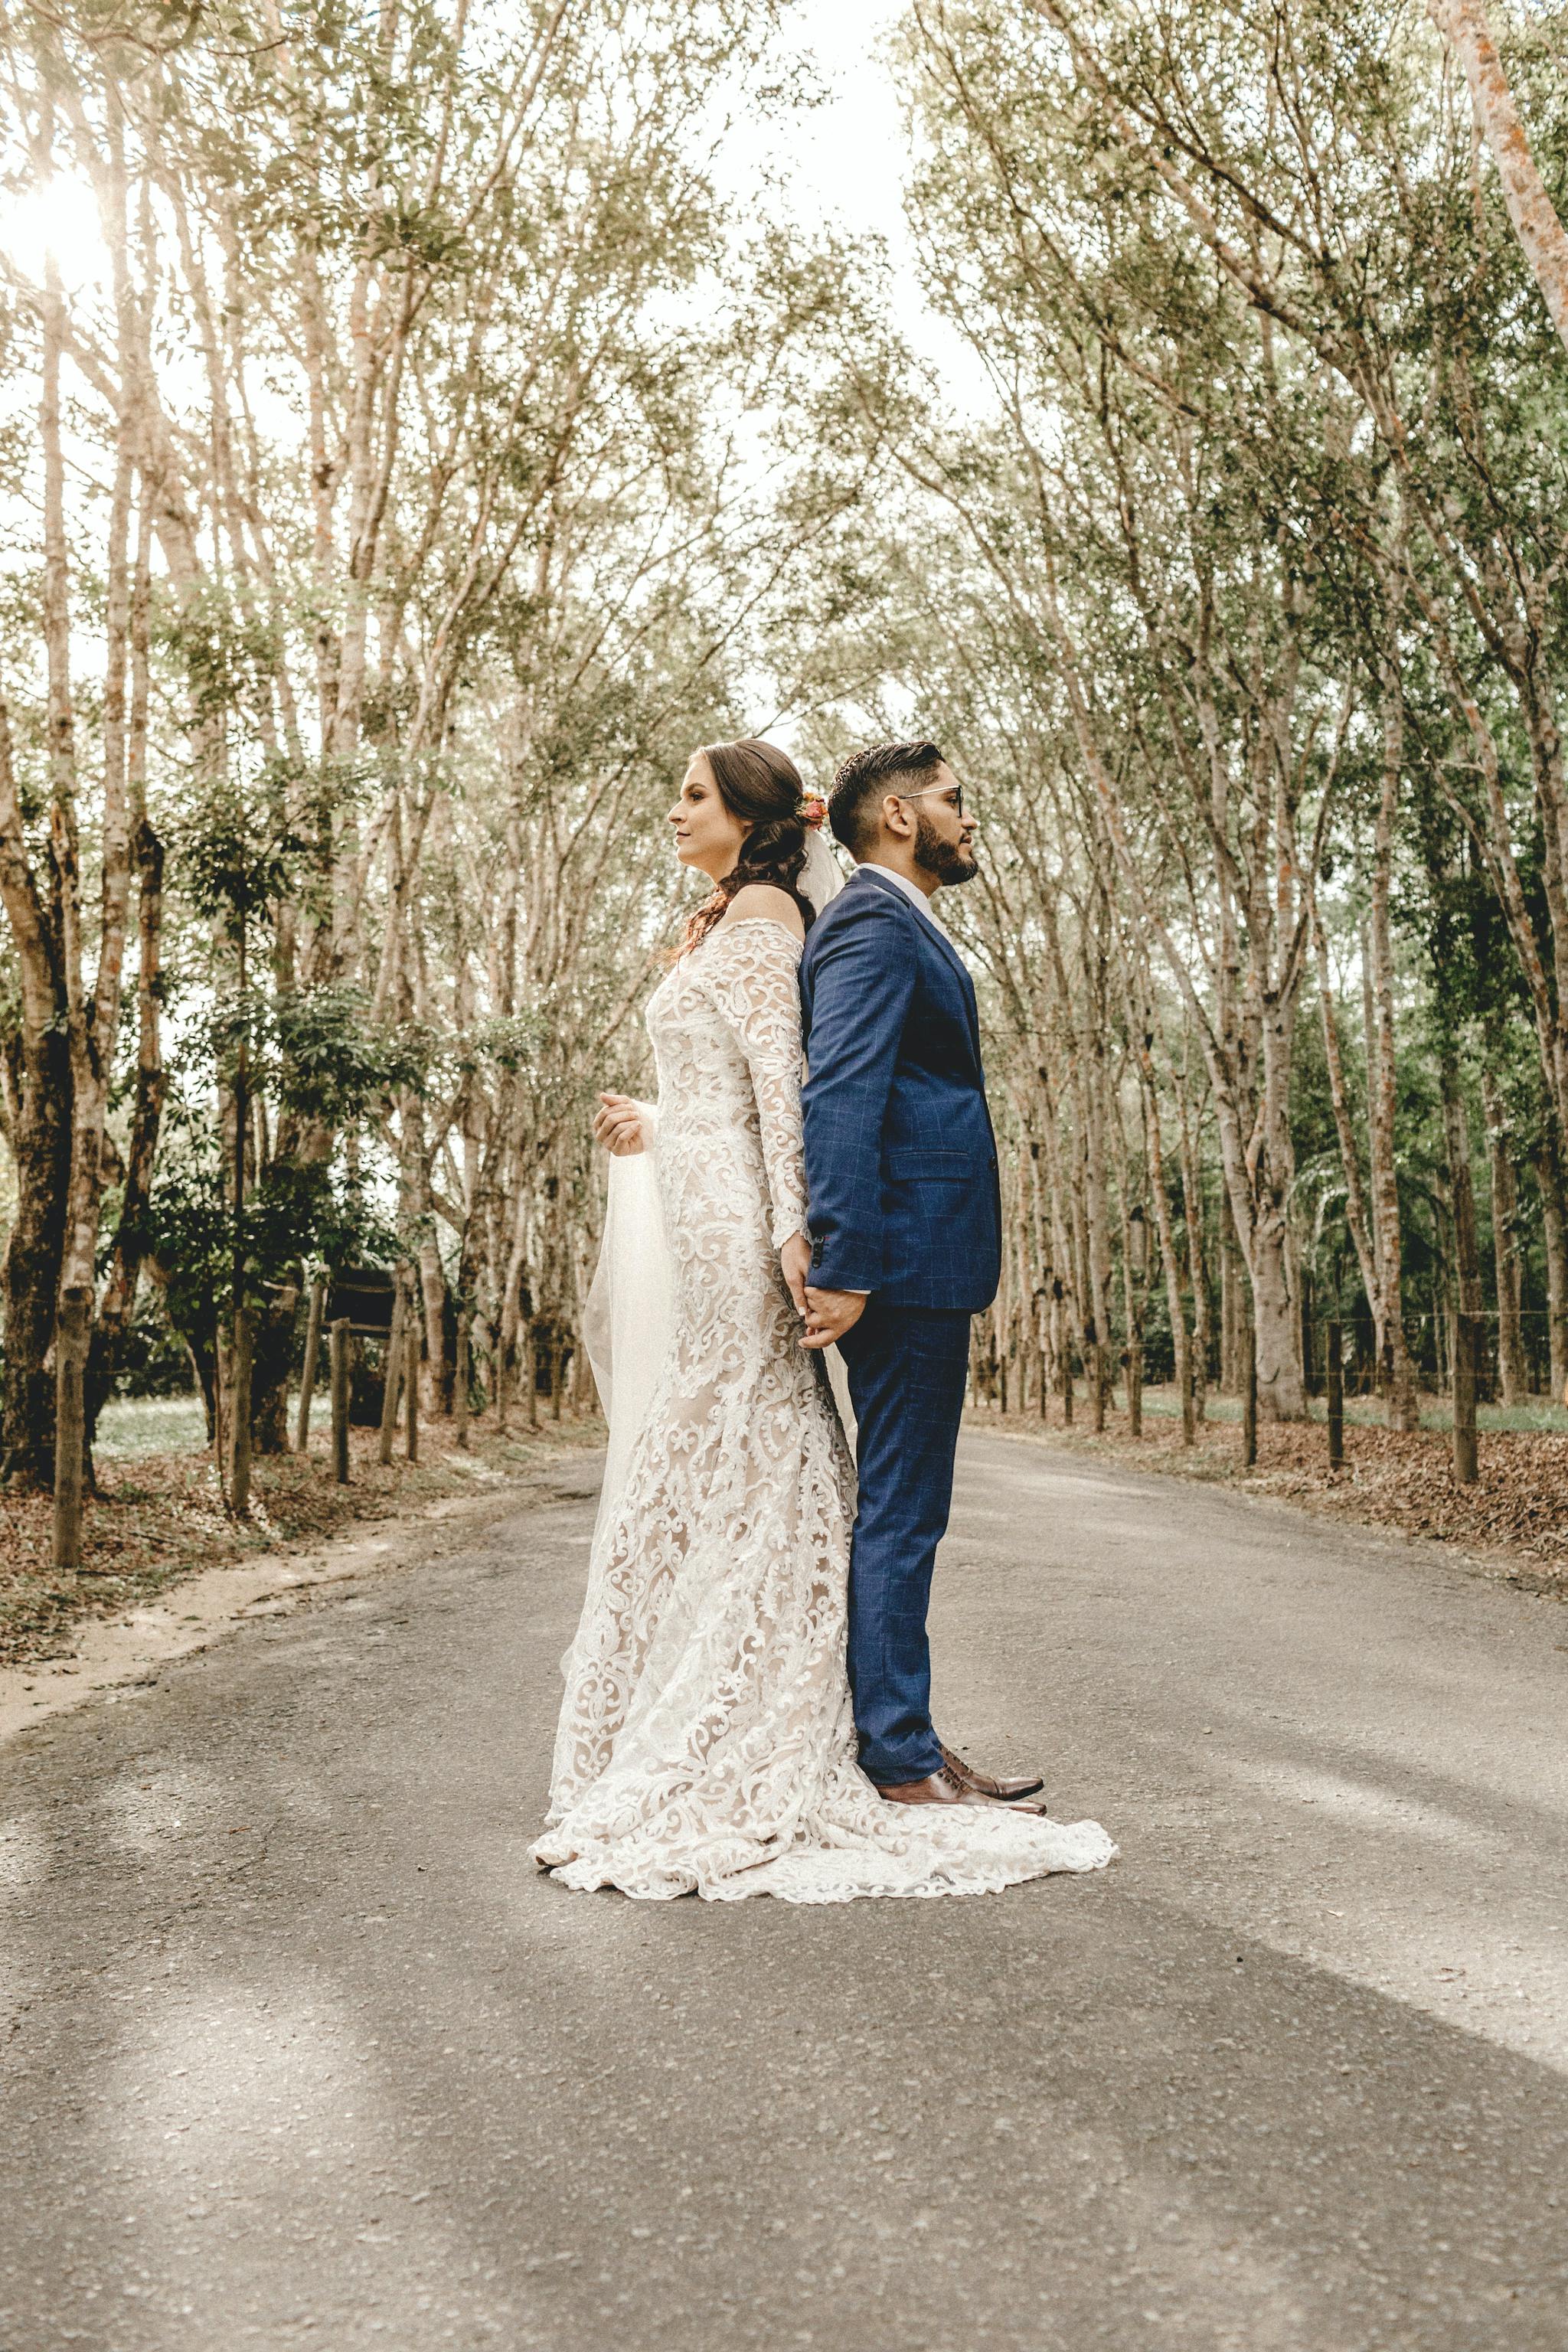 Bride and Groom in front of trees on a street